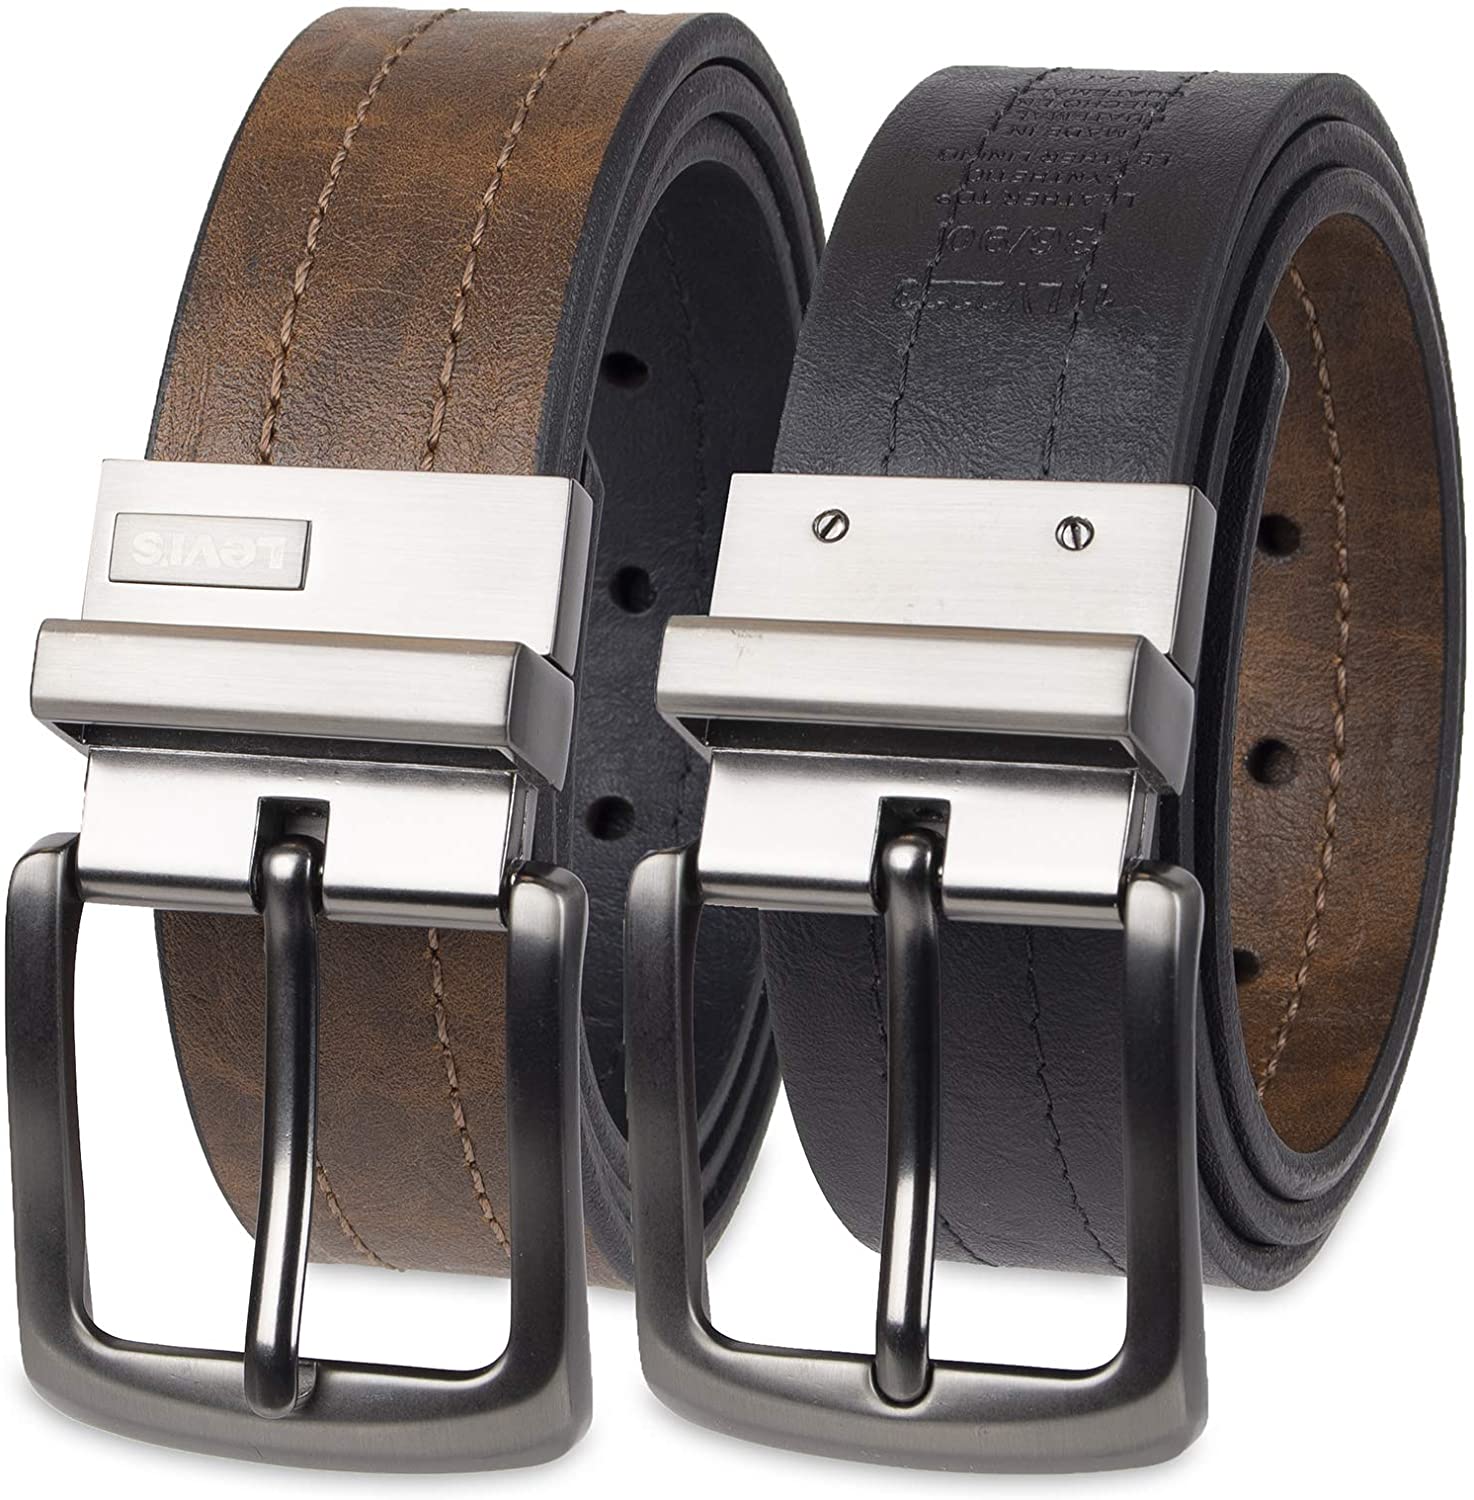 Levi's Reversible Belts -Big and Tall Sizes for Men Casual for Jeans | eBay